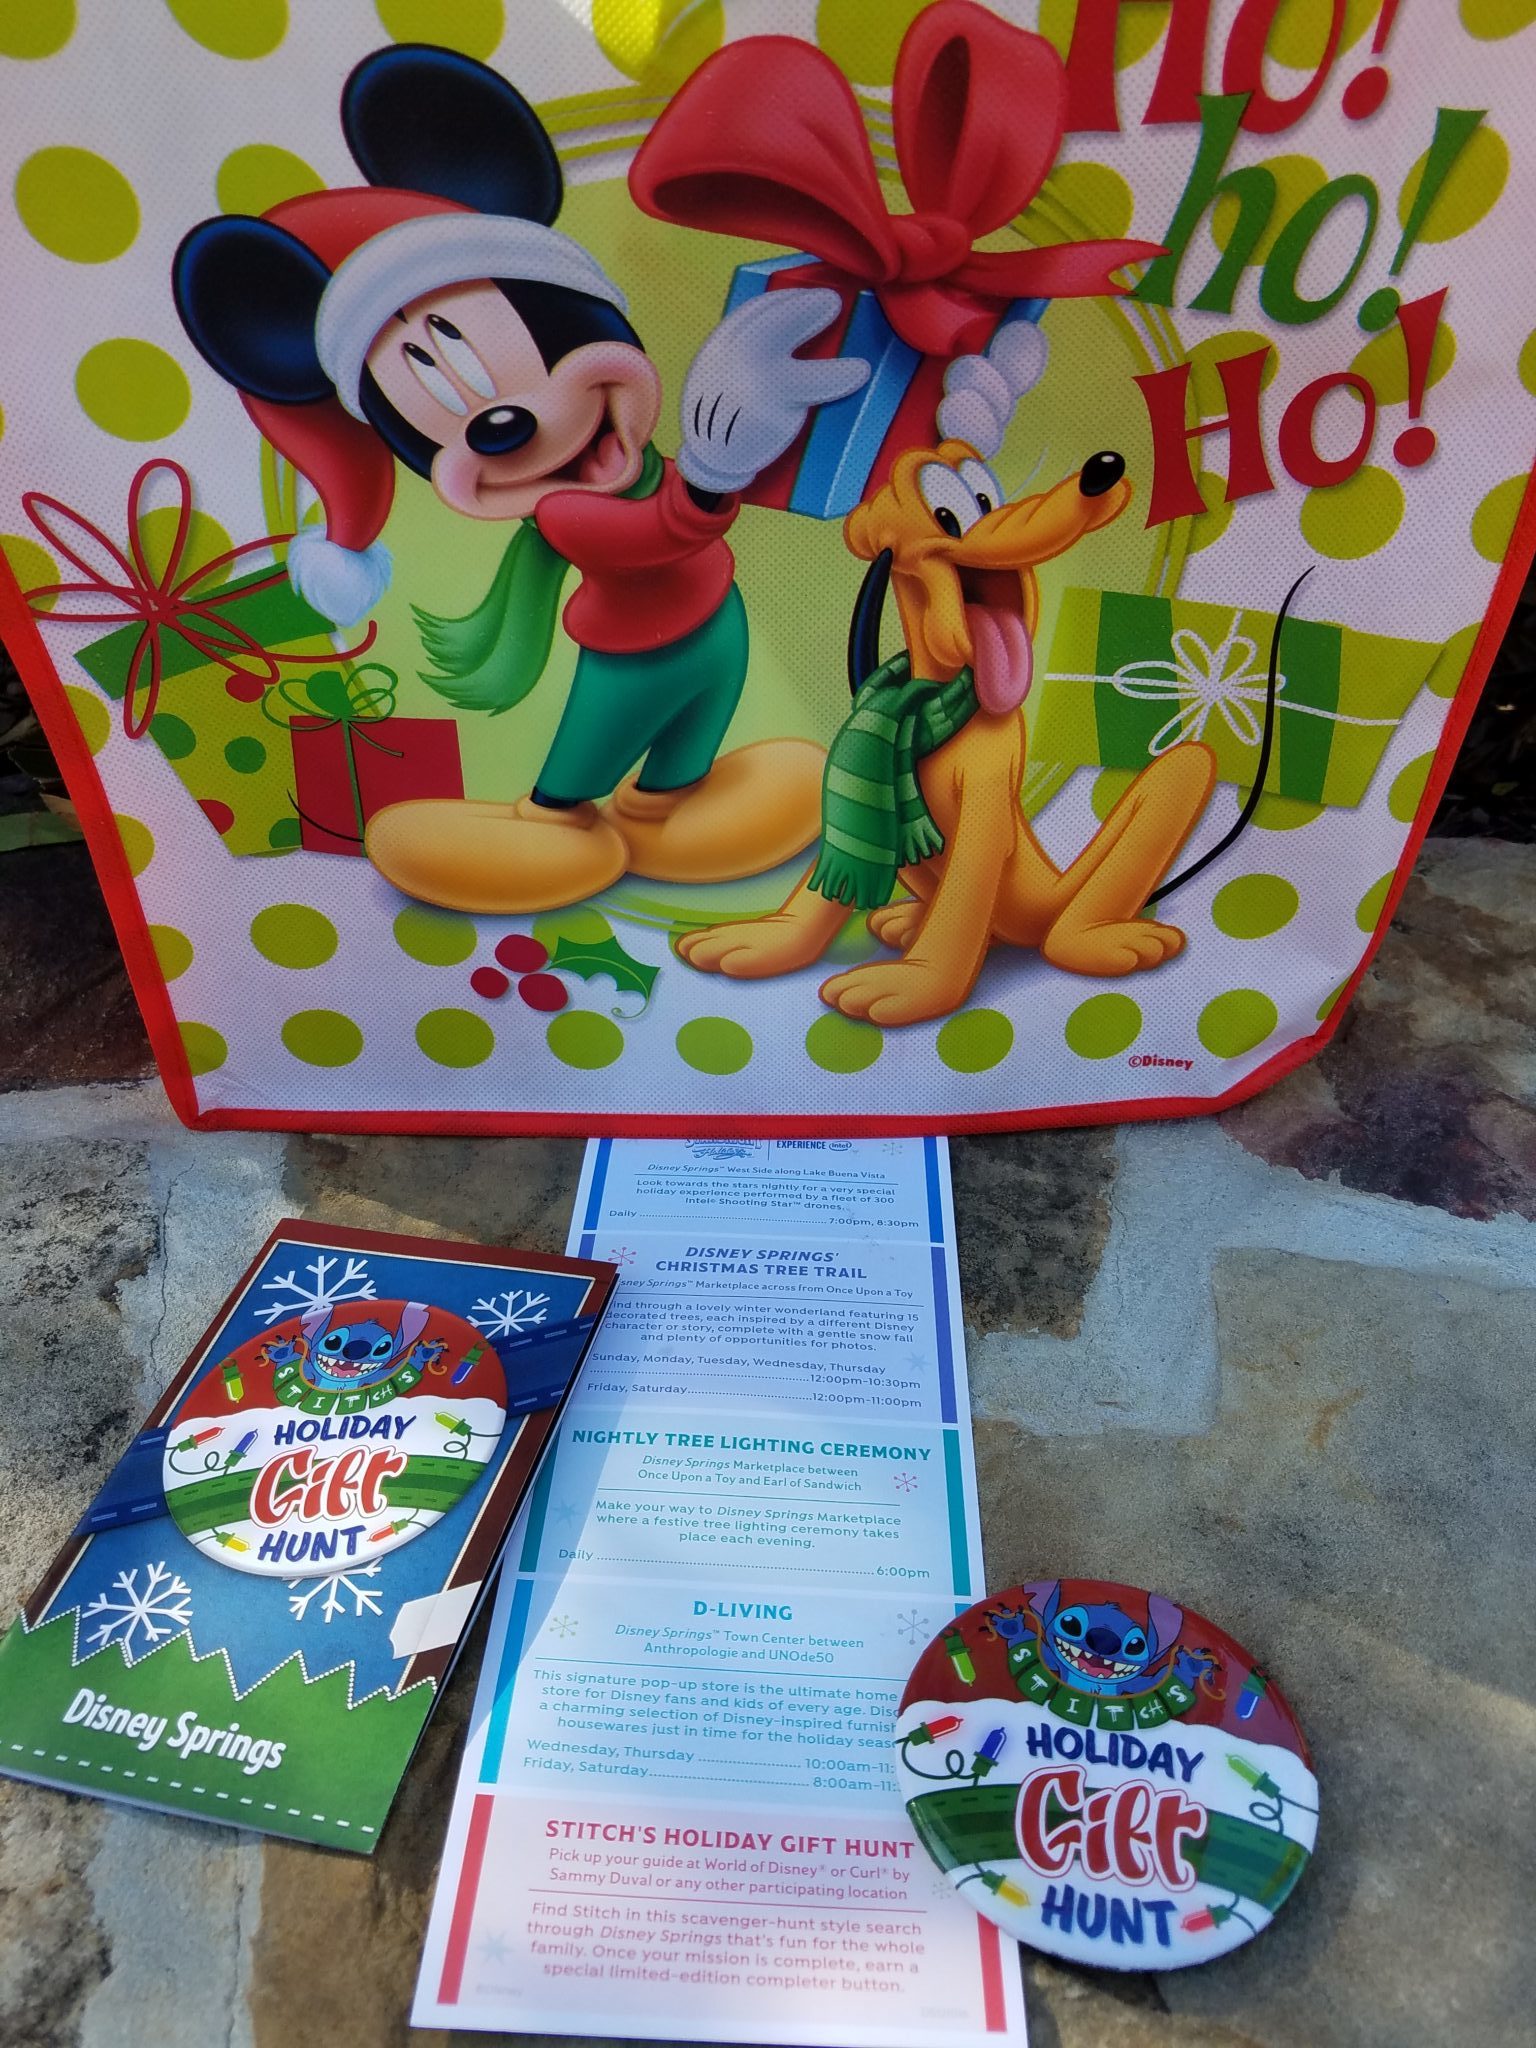 Stitch’s Holiday Gift Hunt At Disney Springs Is Festive Fun For Everyone